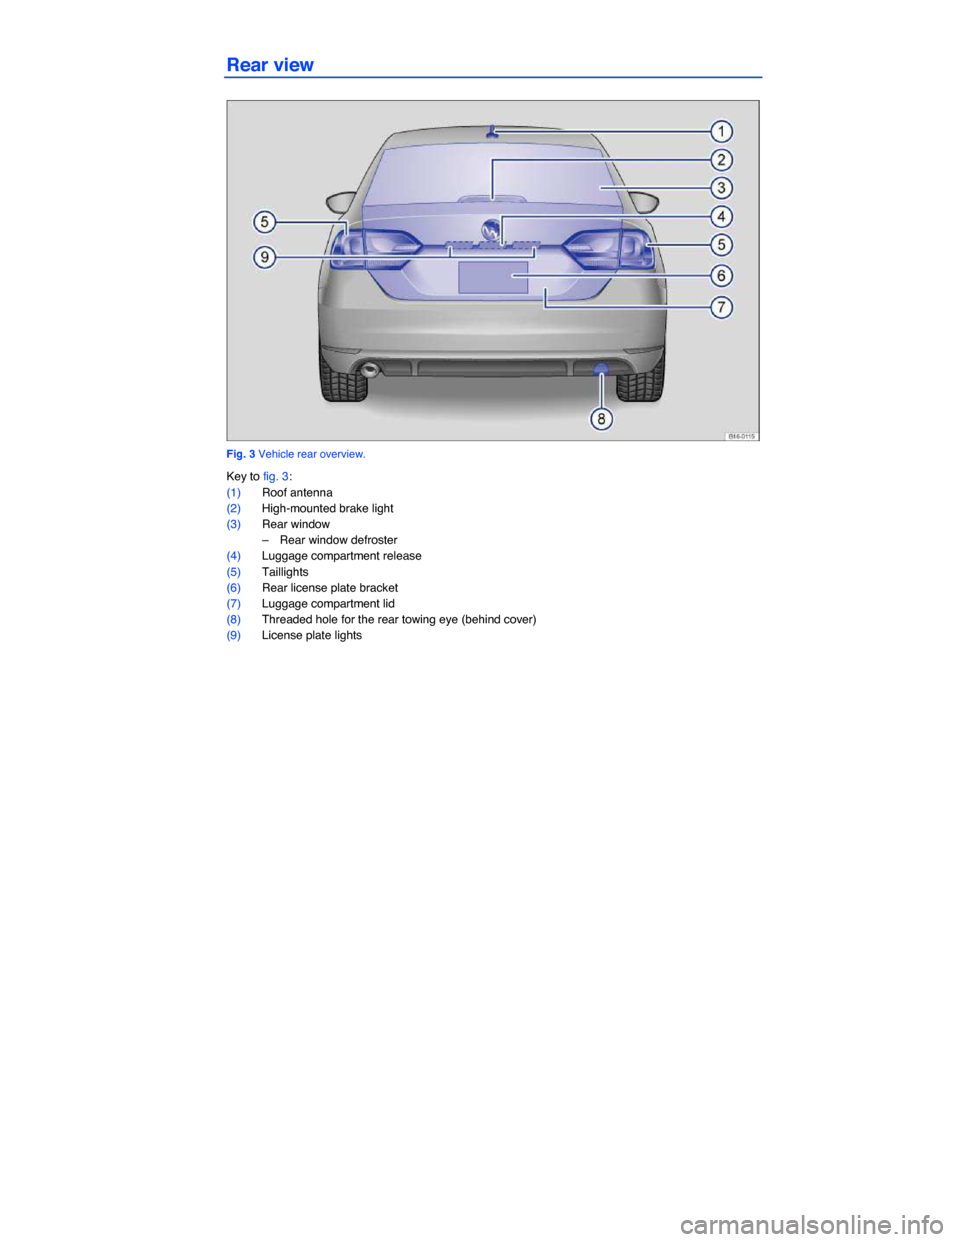 VOLKSWAGEN JETTA GLI 2013 1B / 6.G Owners Manual  
Rear view 
 
Fig. 3 Vehicle rear overview. 
Key to fig. 3: 
(1) Roof antenna  
(2) High-mounted brake light  
(3) Rear window 
–  Rear window defroster  
(4) Luggage compartment release  
(5) Tail